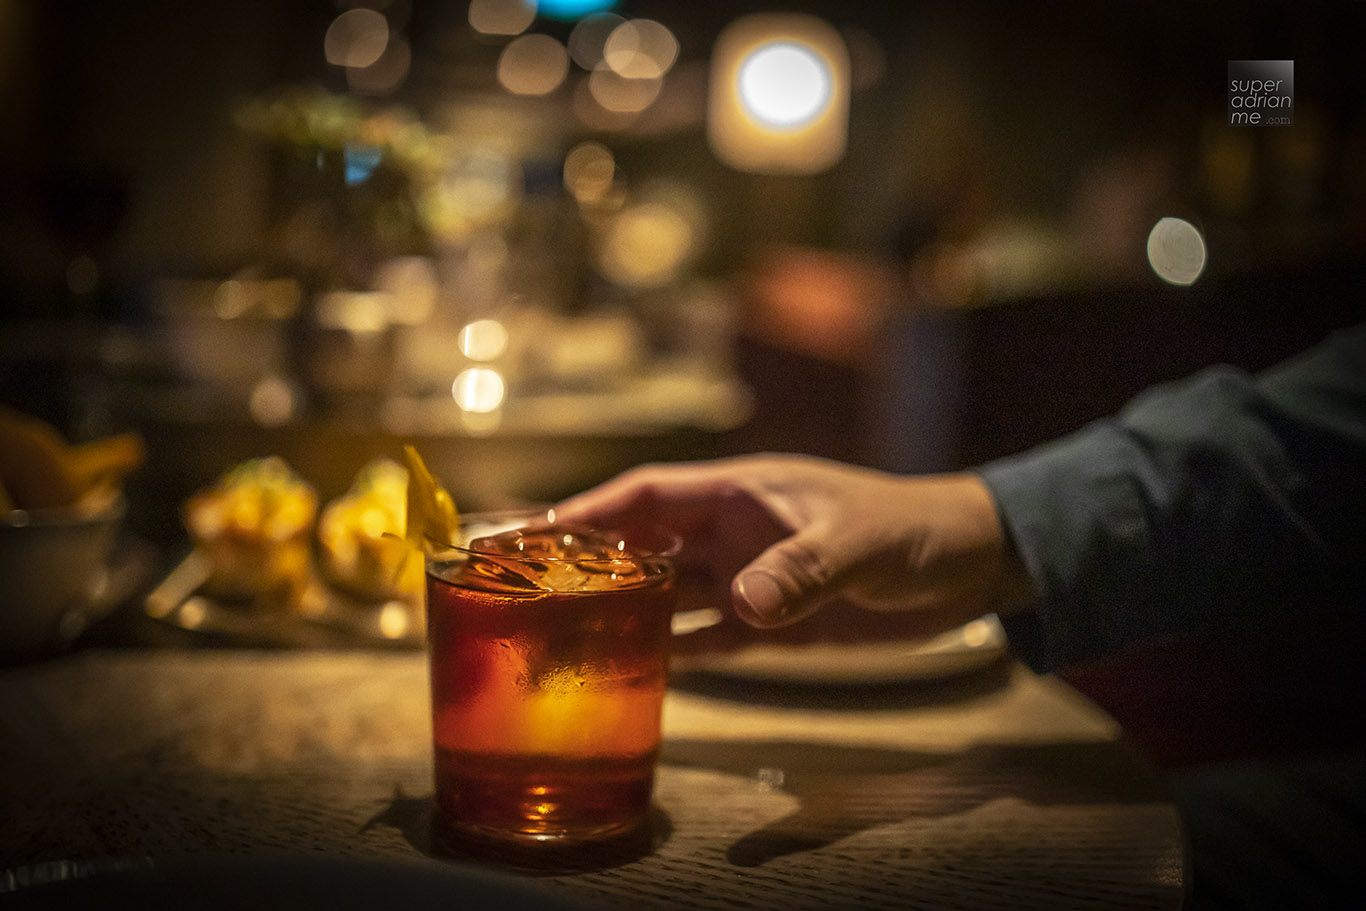 Reaching out for a classic Negroni at MO BAR in Mandarin Oriental, Singapore